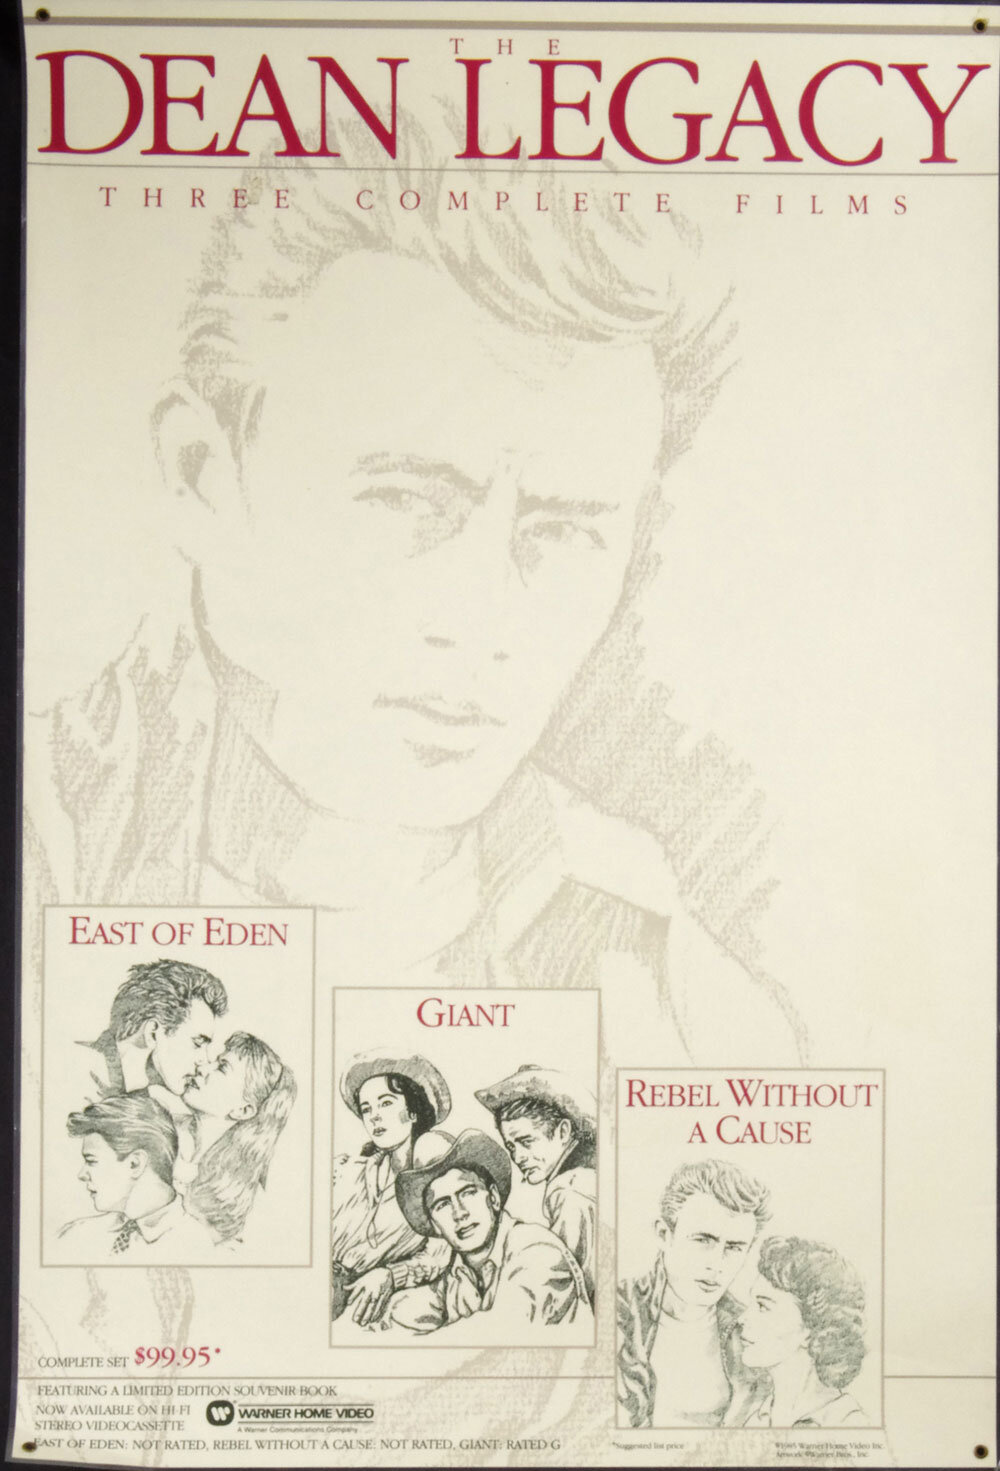 James Dean Poster 1985 The Dean Legacy Home Video Promotion Laminated